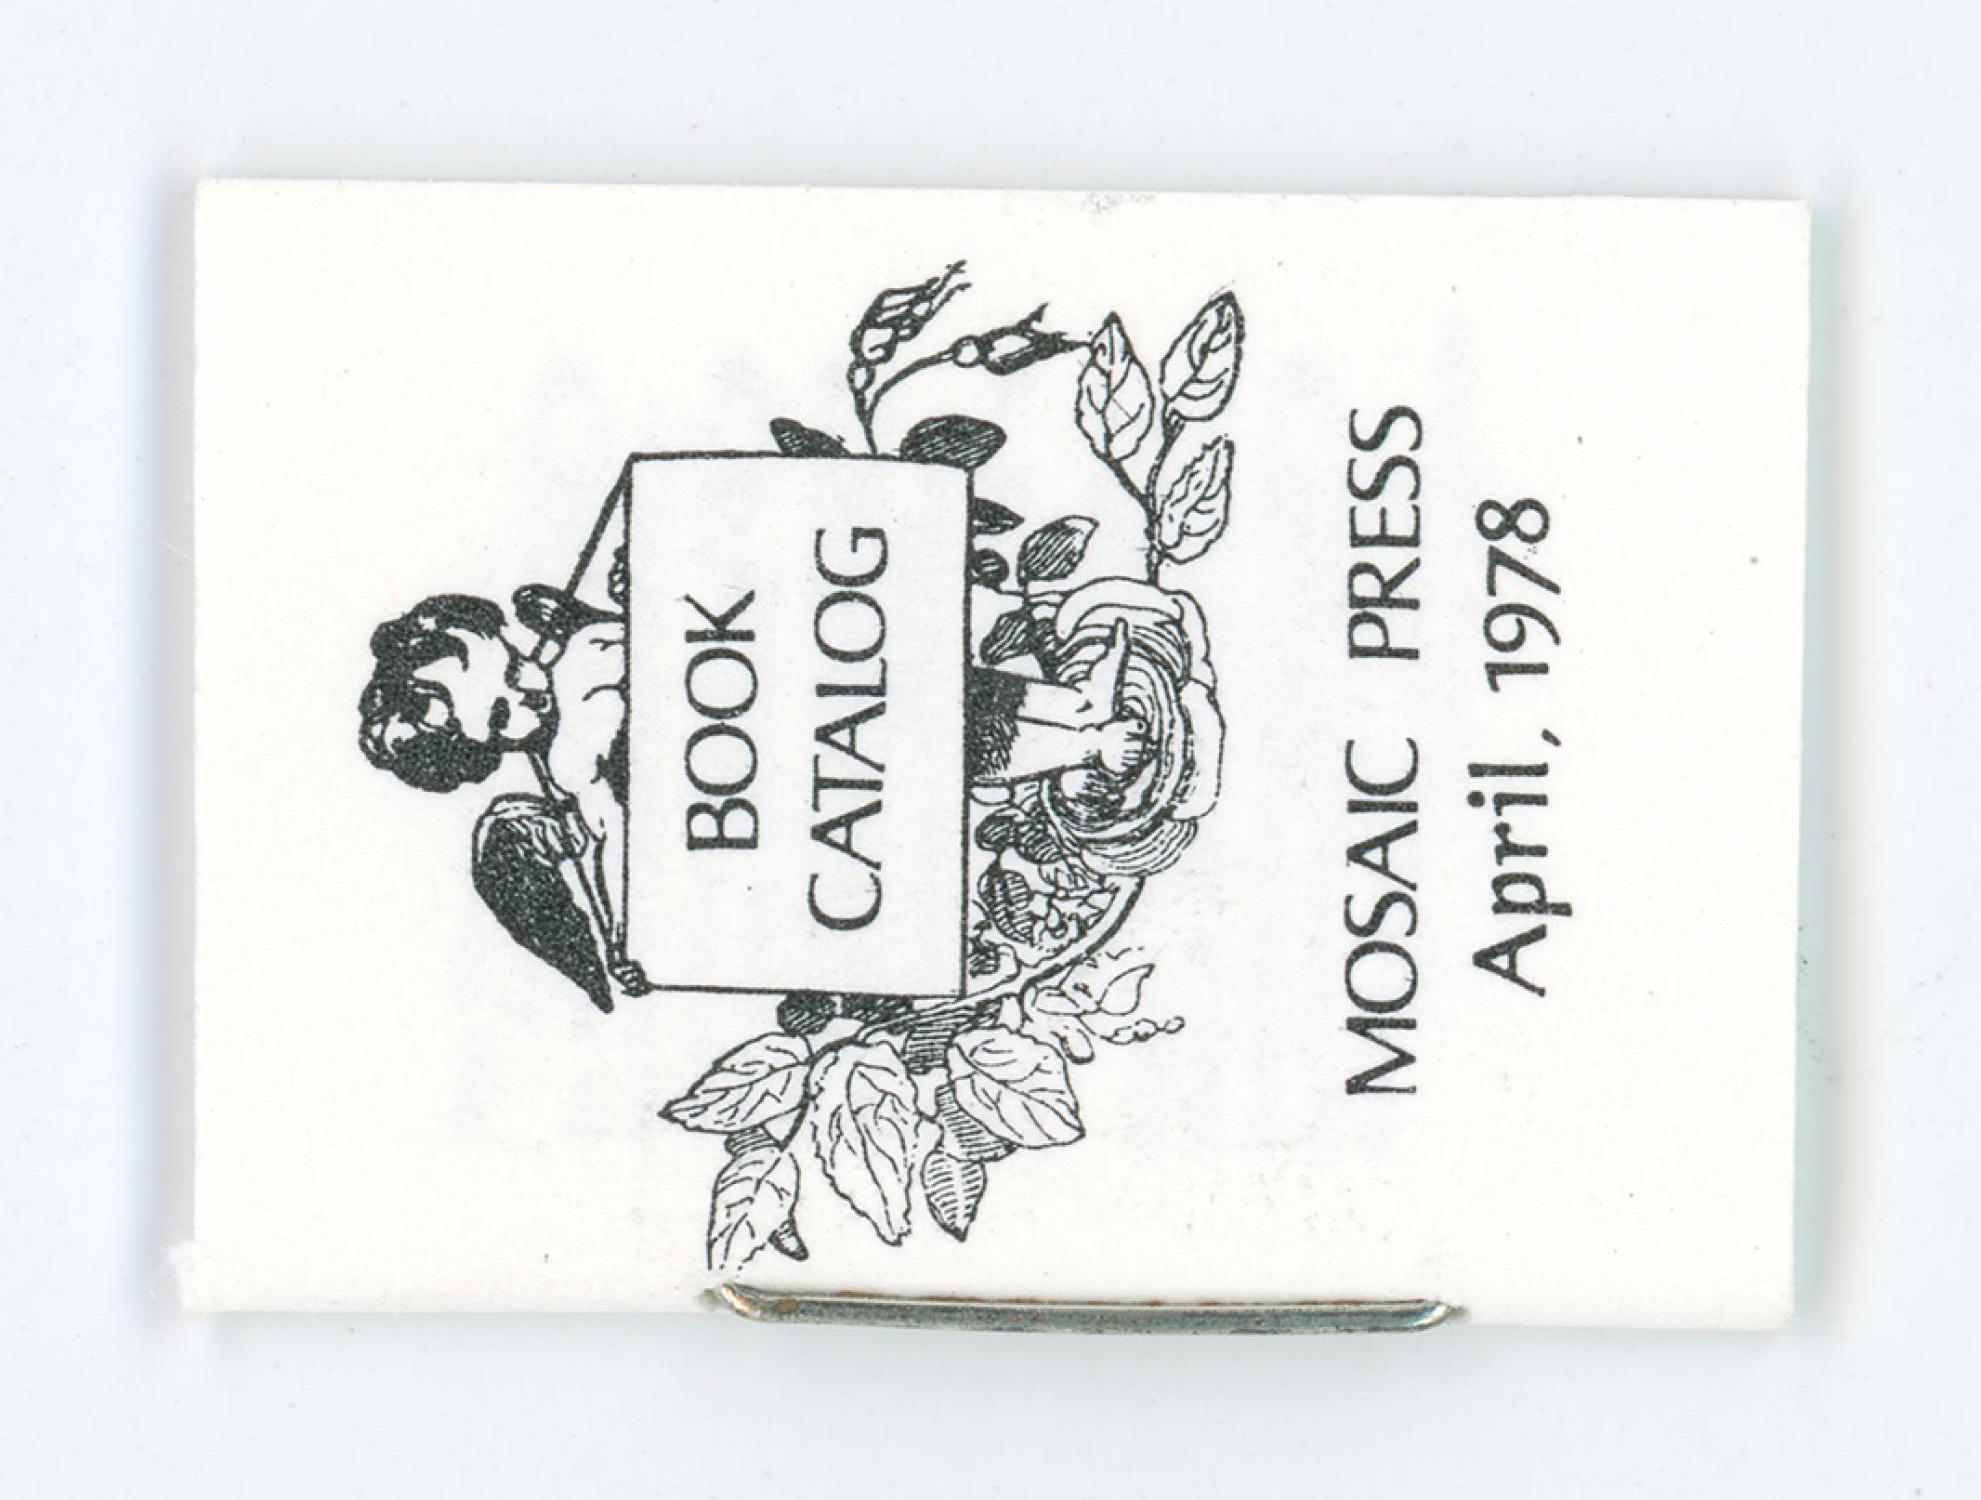 [Miniature book catalog]
                                                
                                                    [Sequence #]: 1 of 9
                                                